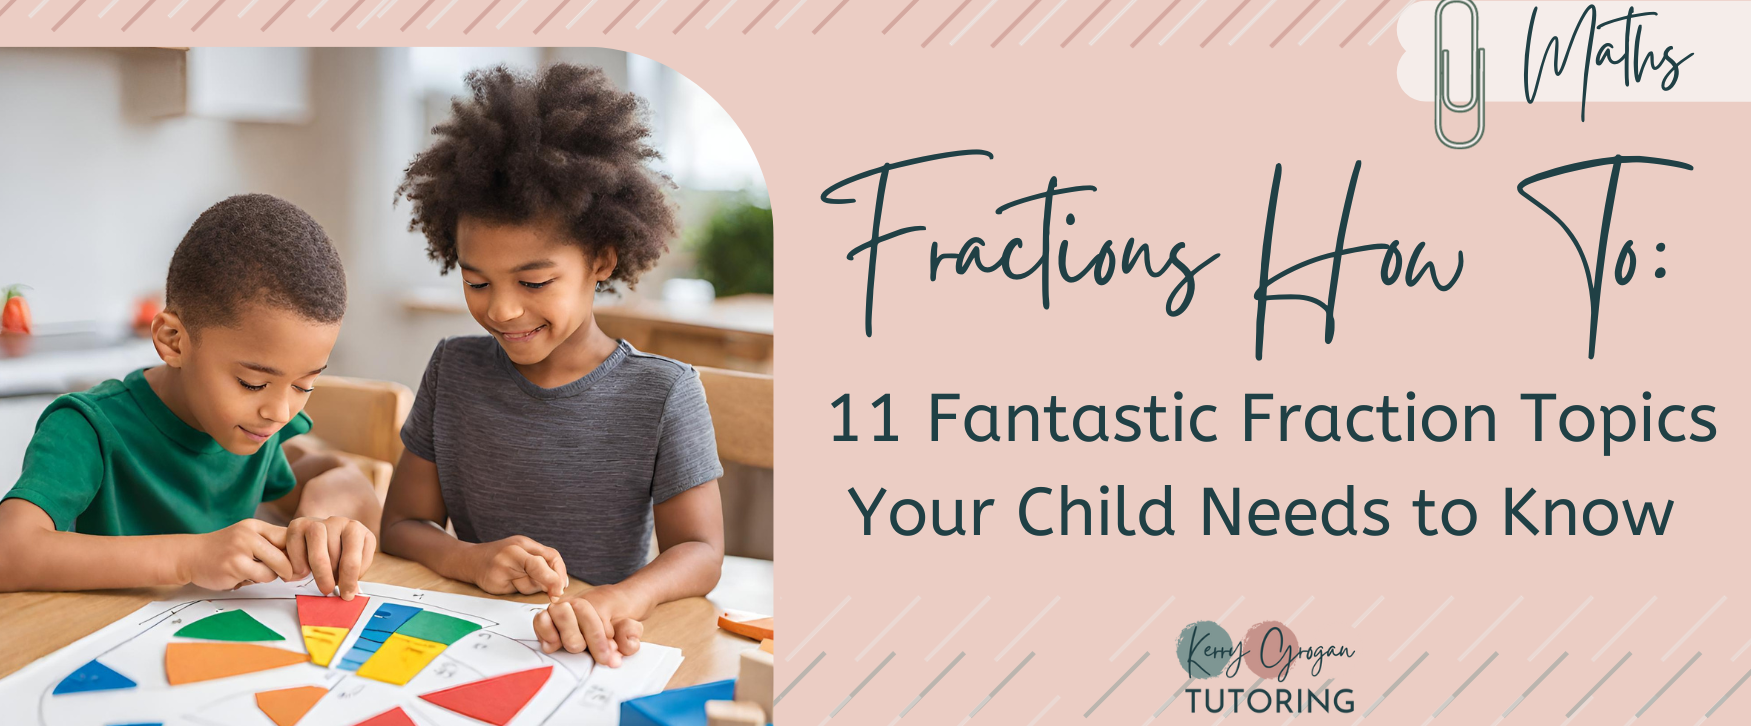 Fractions How To: 11 Fantastic Fraction Topics Your Child Needs to Know